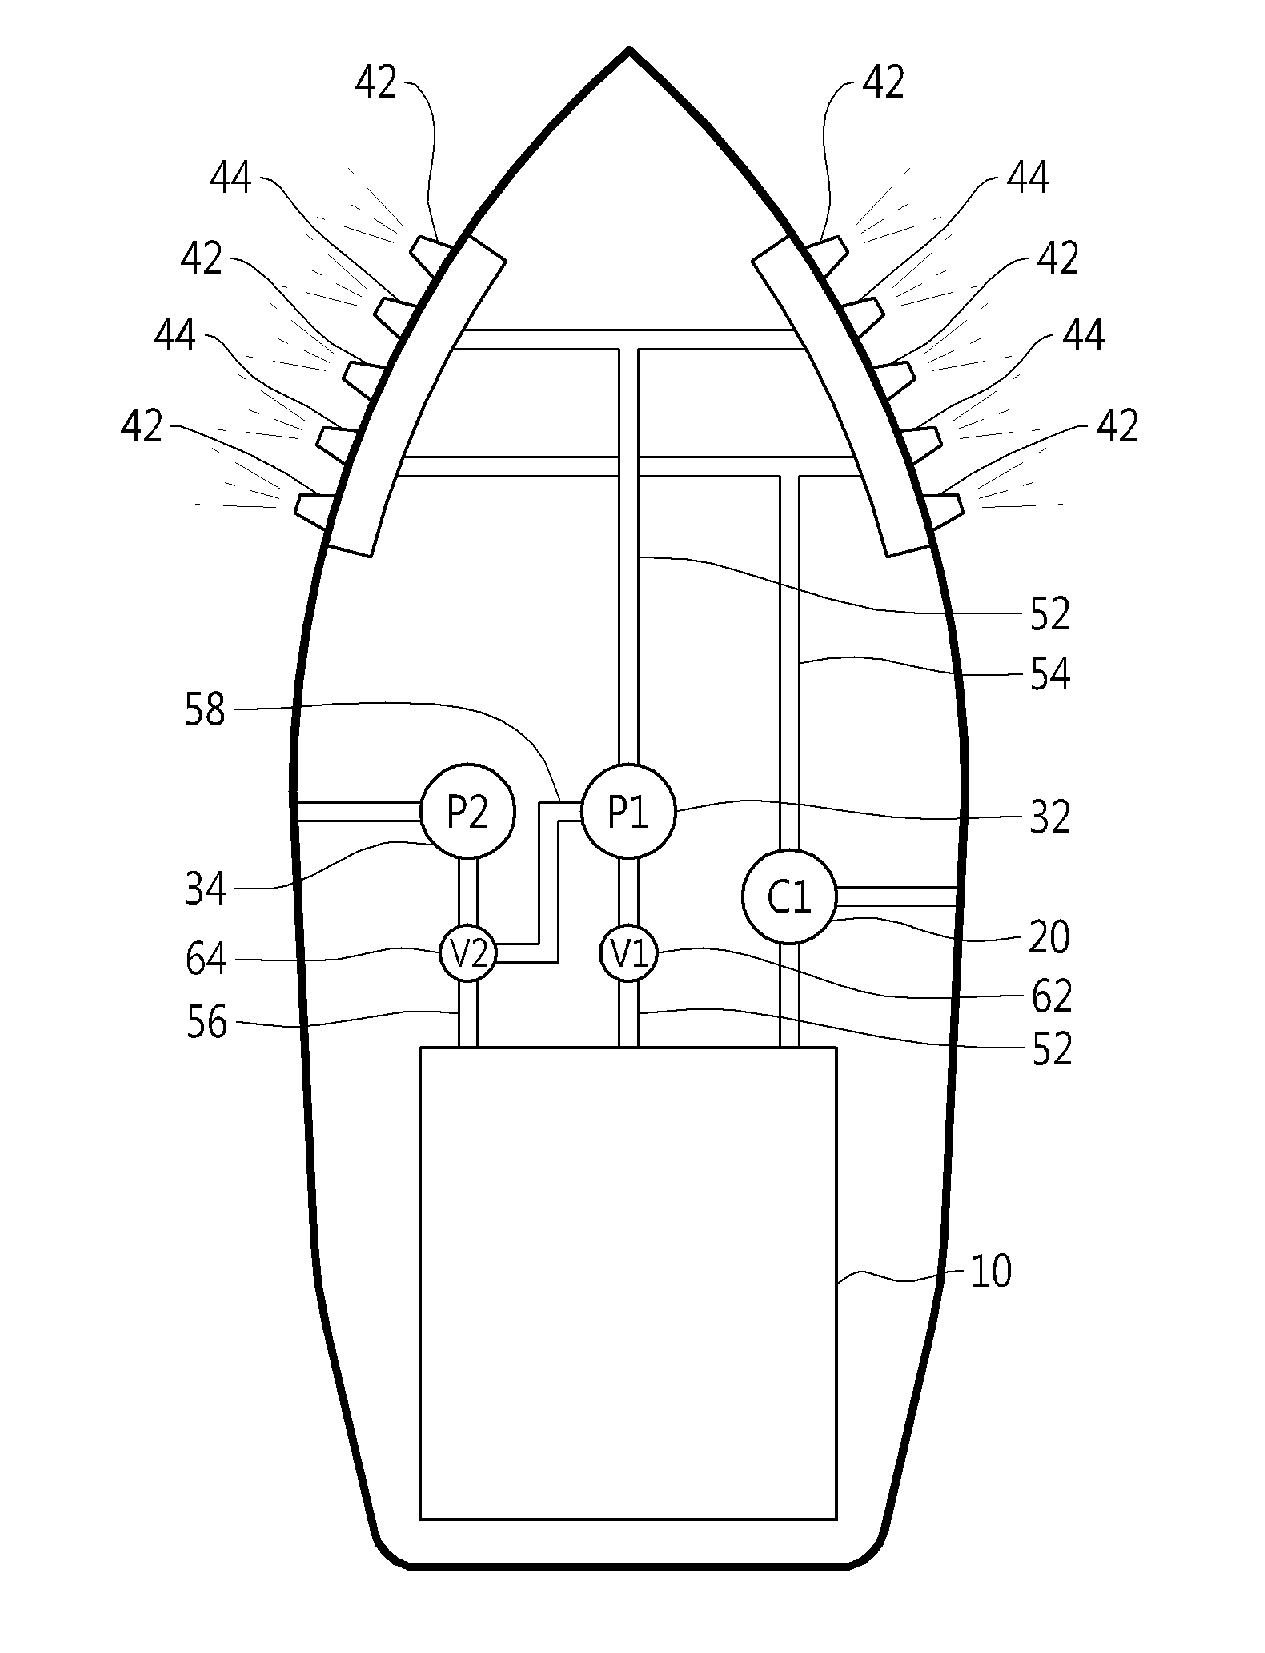 Apparatus and method for producing and storing more ice over ocean